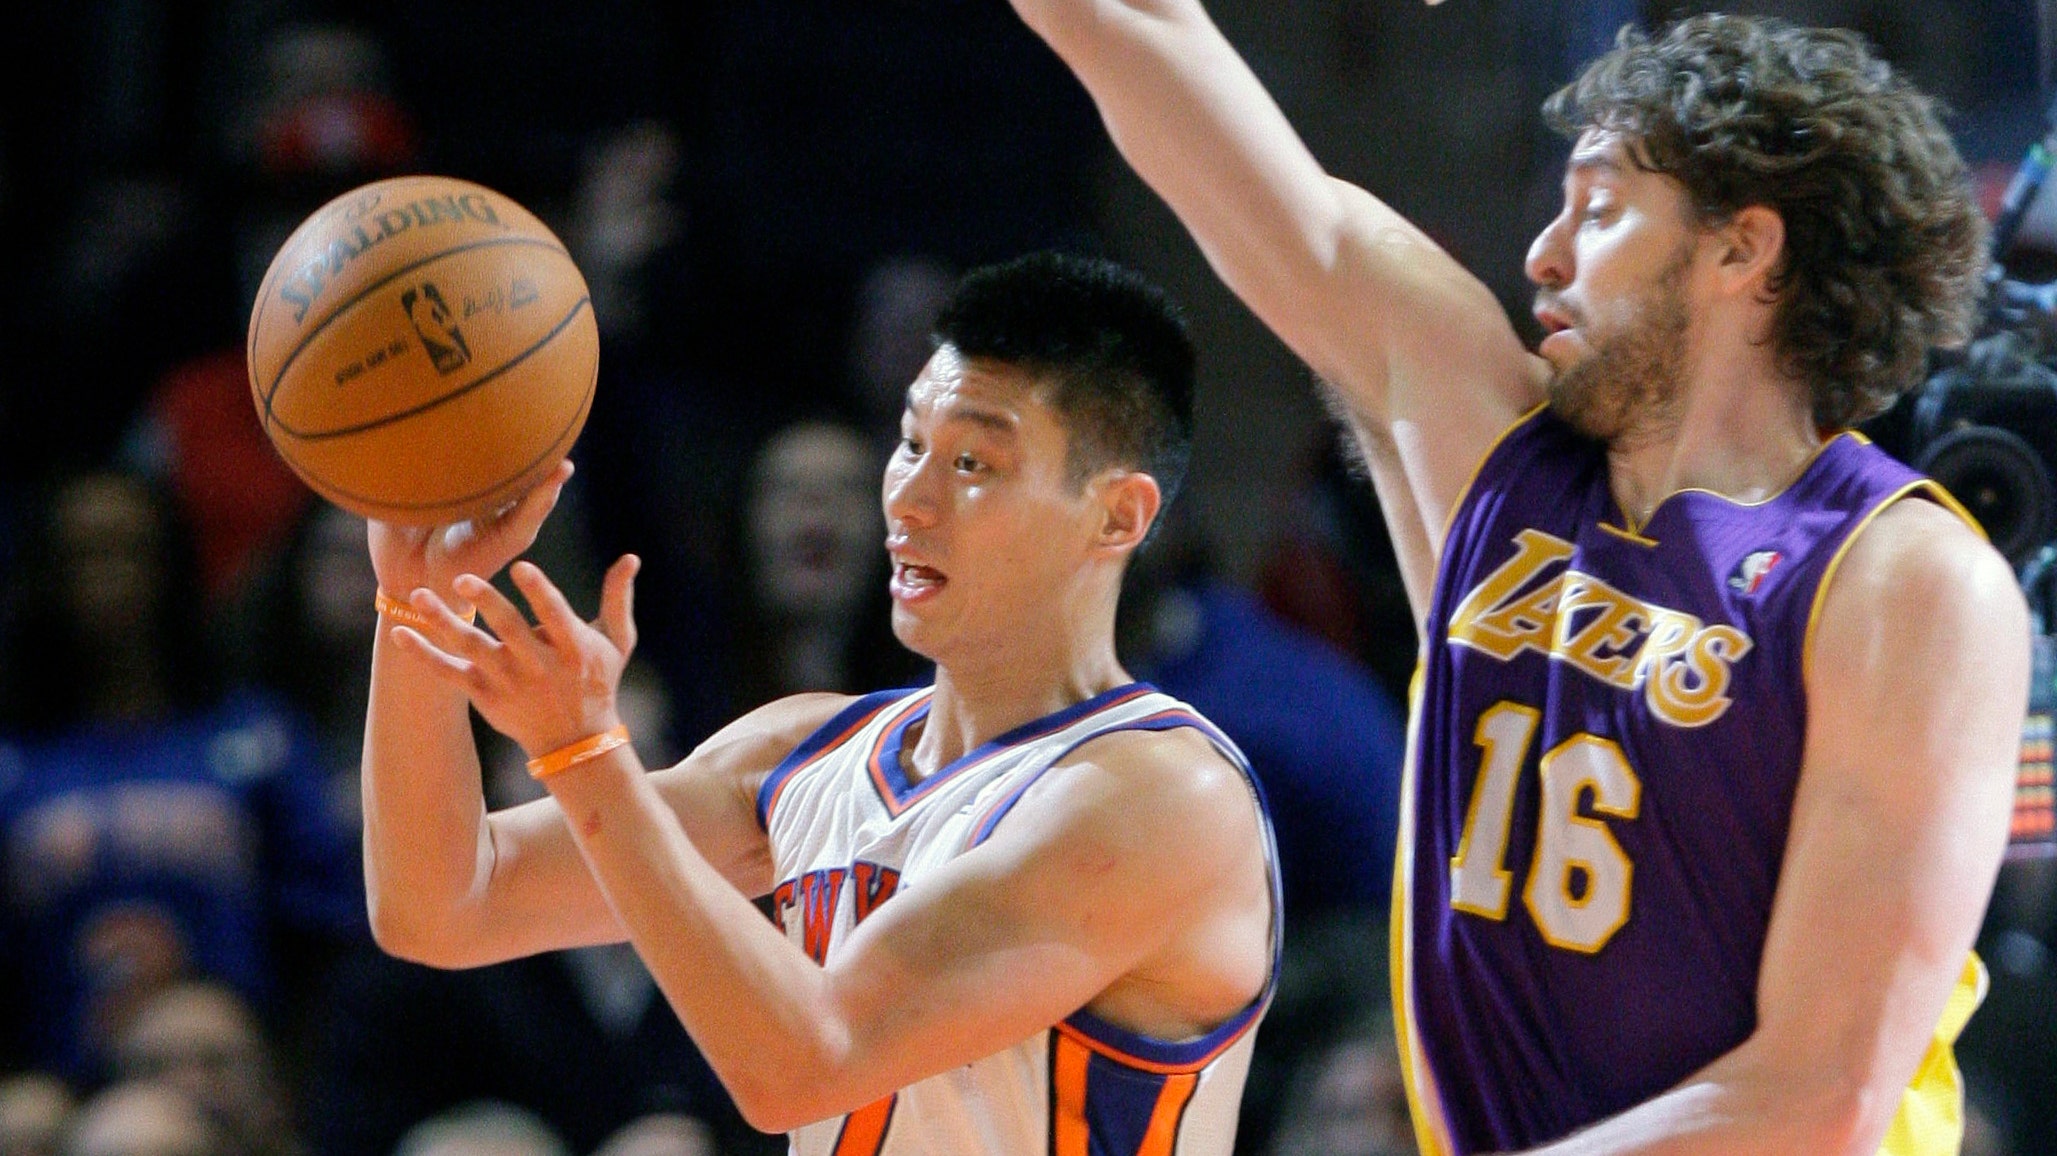 Ex-Knicks star Jeremy Lin speaks out against racism toward Asian community